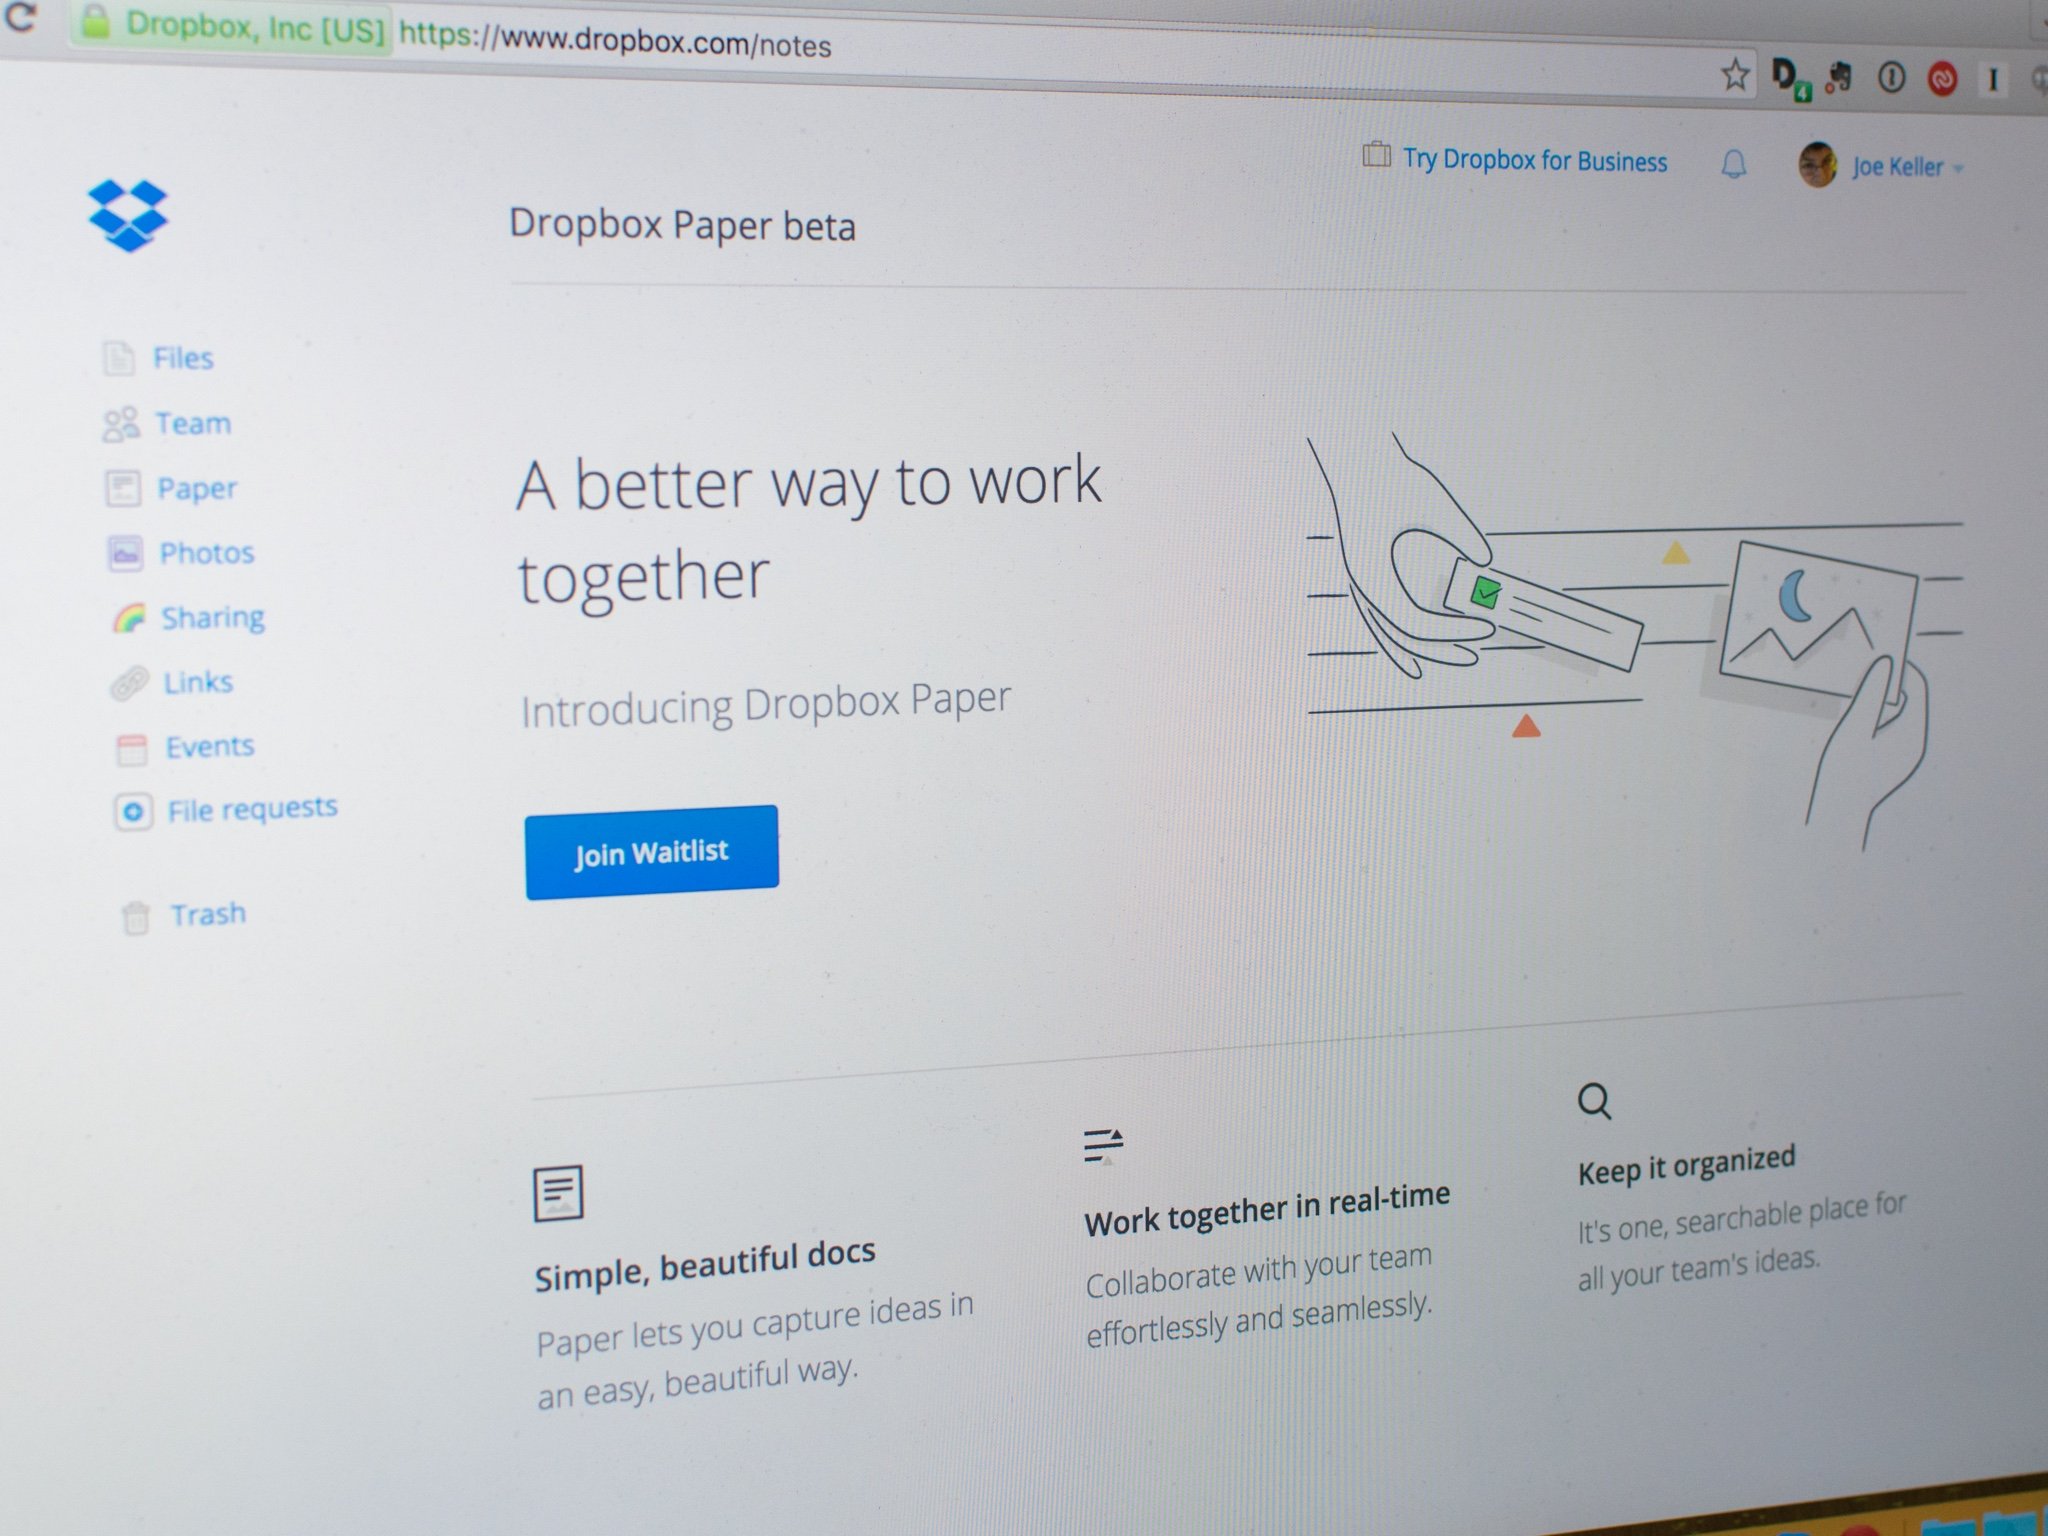 Dropbox launches Paper collaboration tool to take on Google Docs